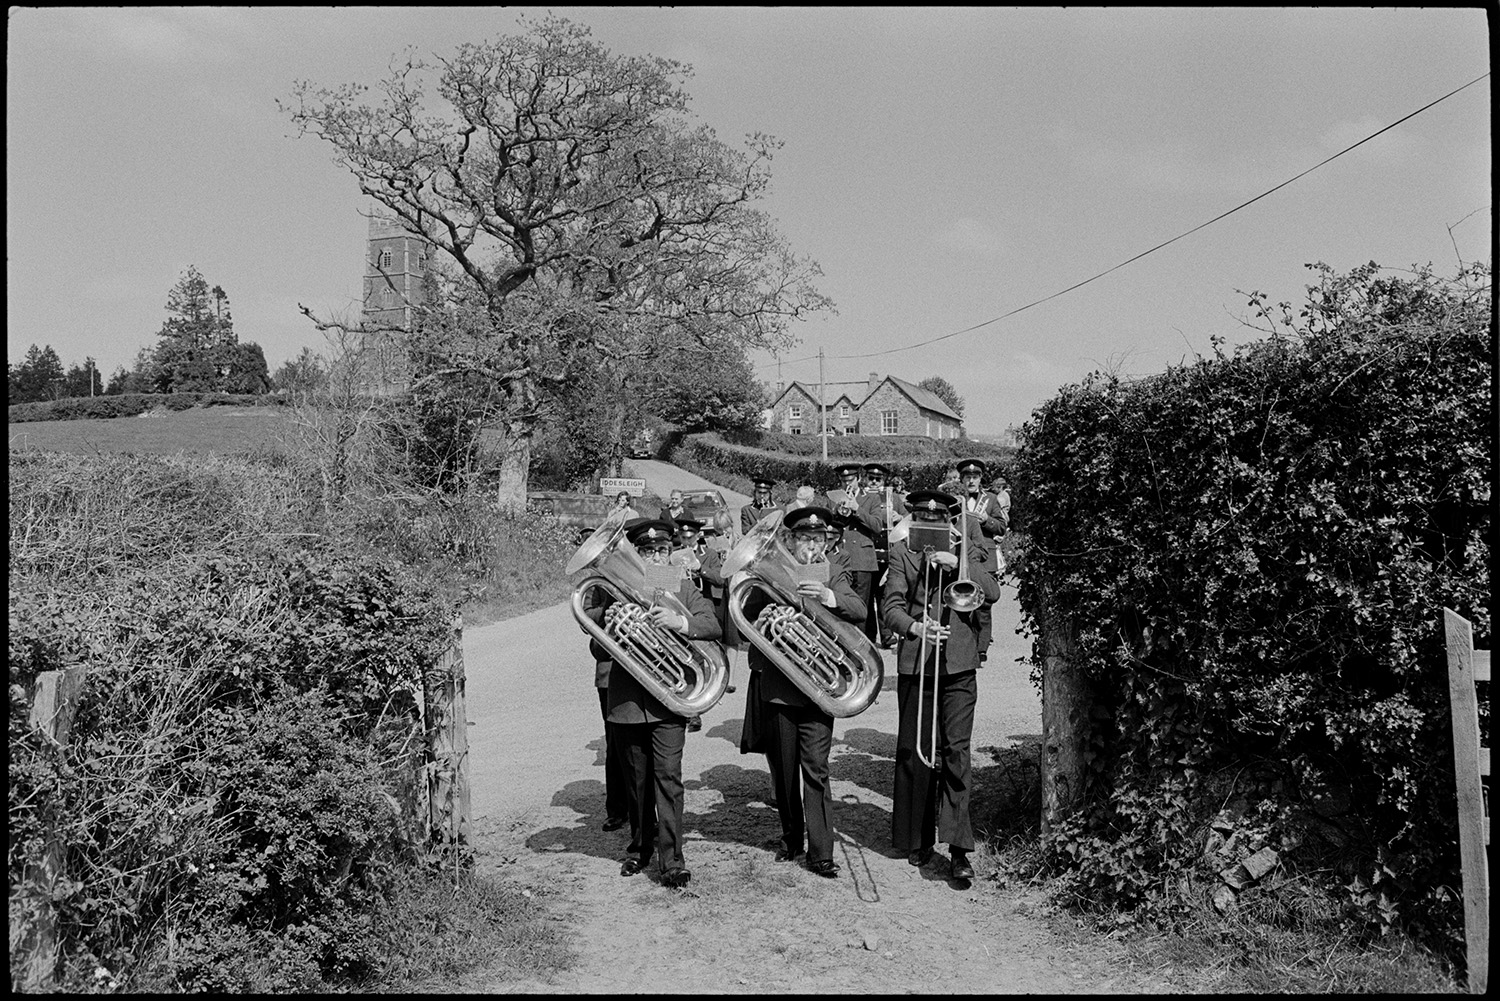 Club Day procession. Band and villagers marching to sports field.
[The Hatherleigh Silver Band parading down a road for the Iddesleigh Club Day procession.  Iddesleigh Church can be seen behind a tree in the background.]